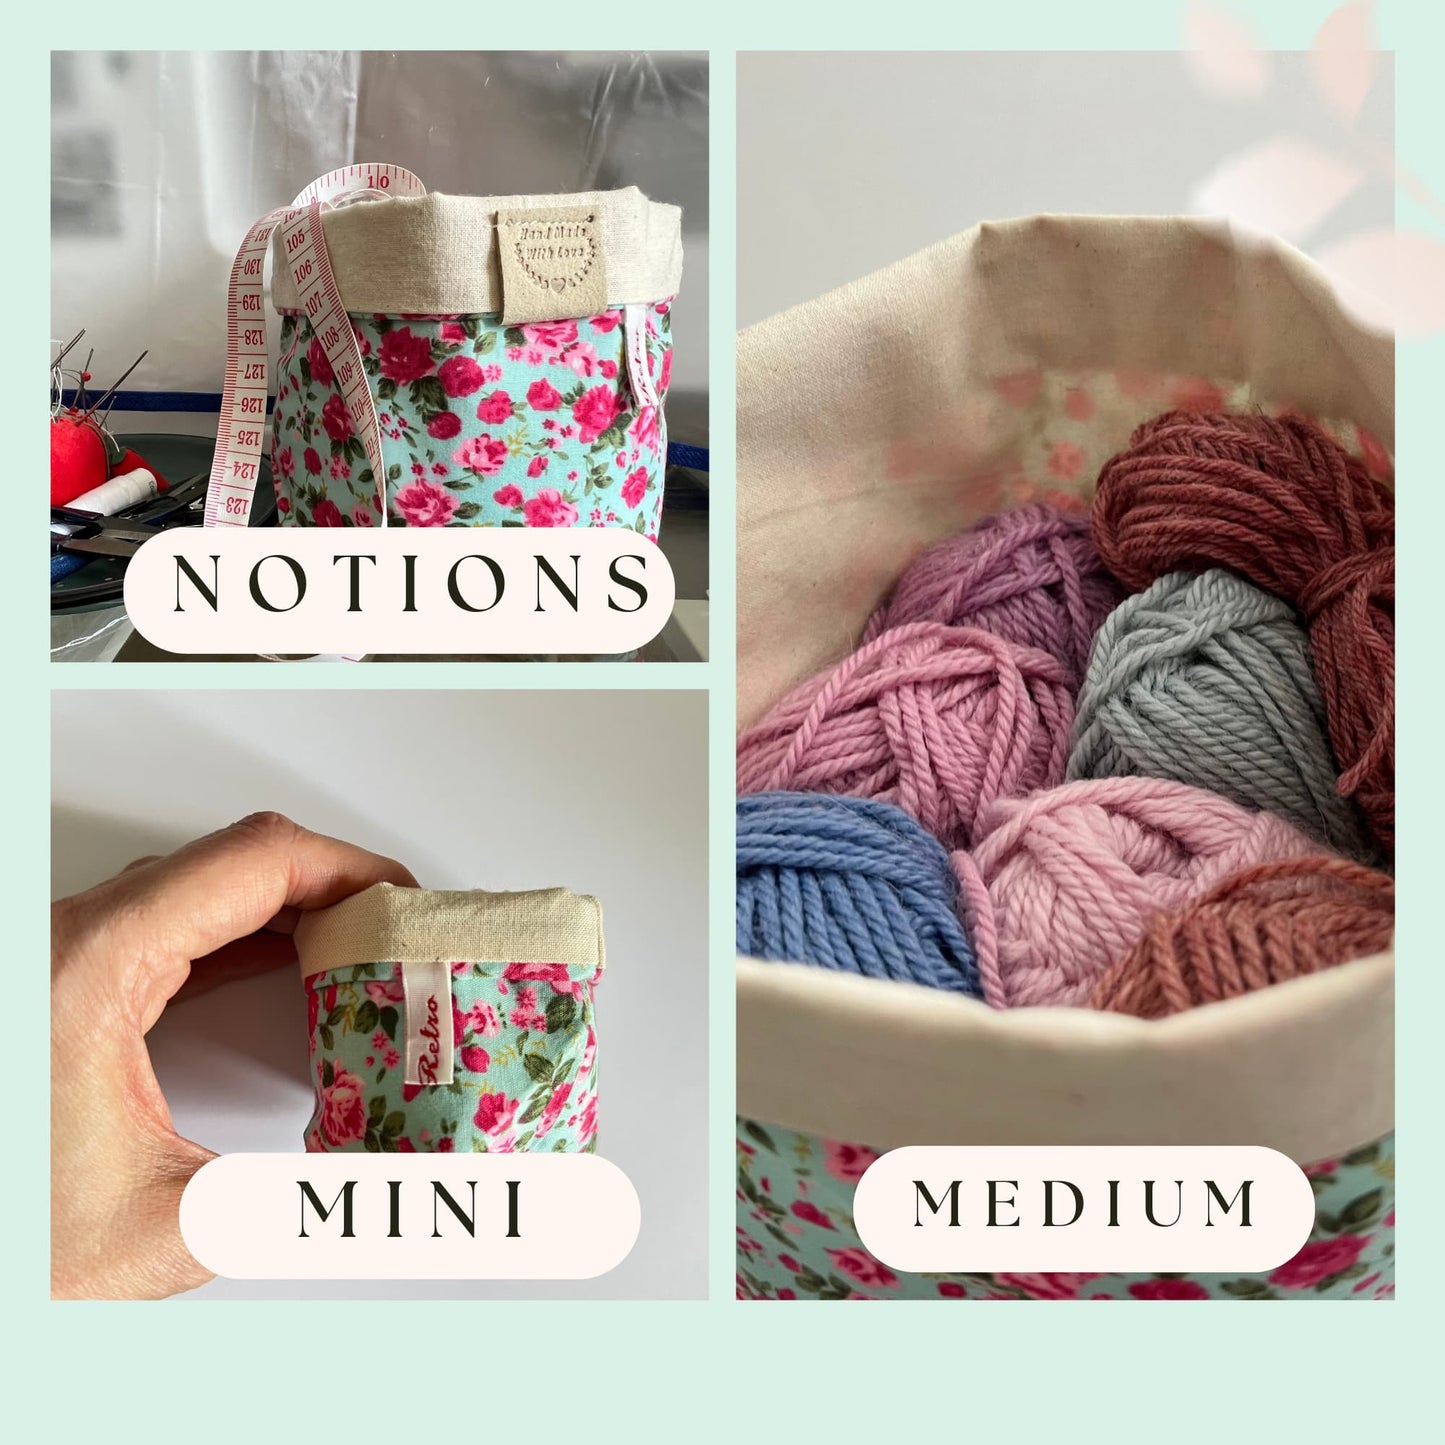 Storage basket, Craft tub for Knitting and Crochet Projects- MINT ROSE